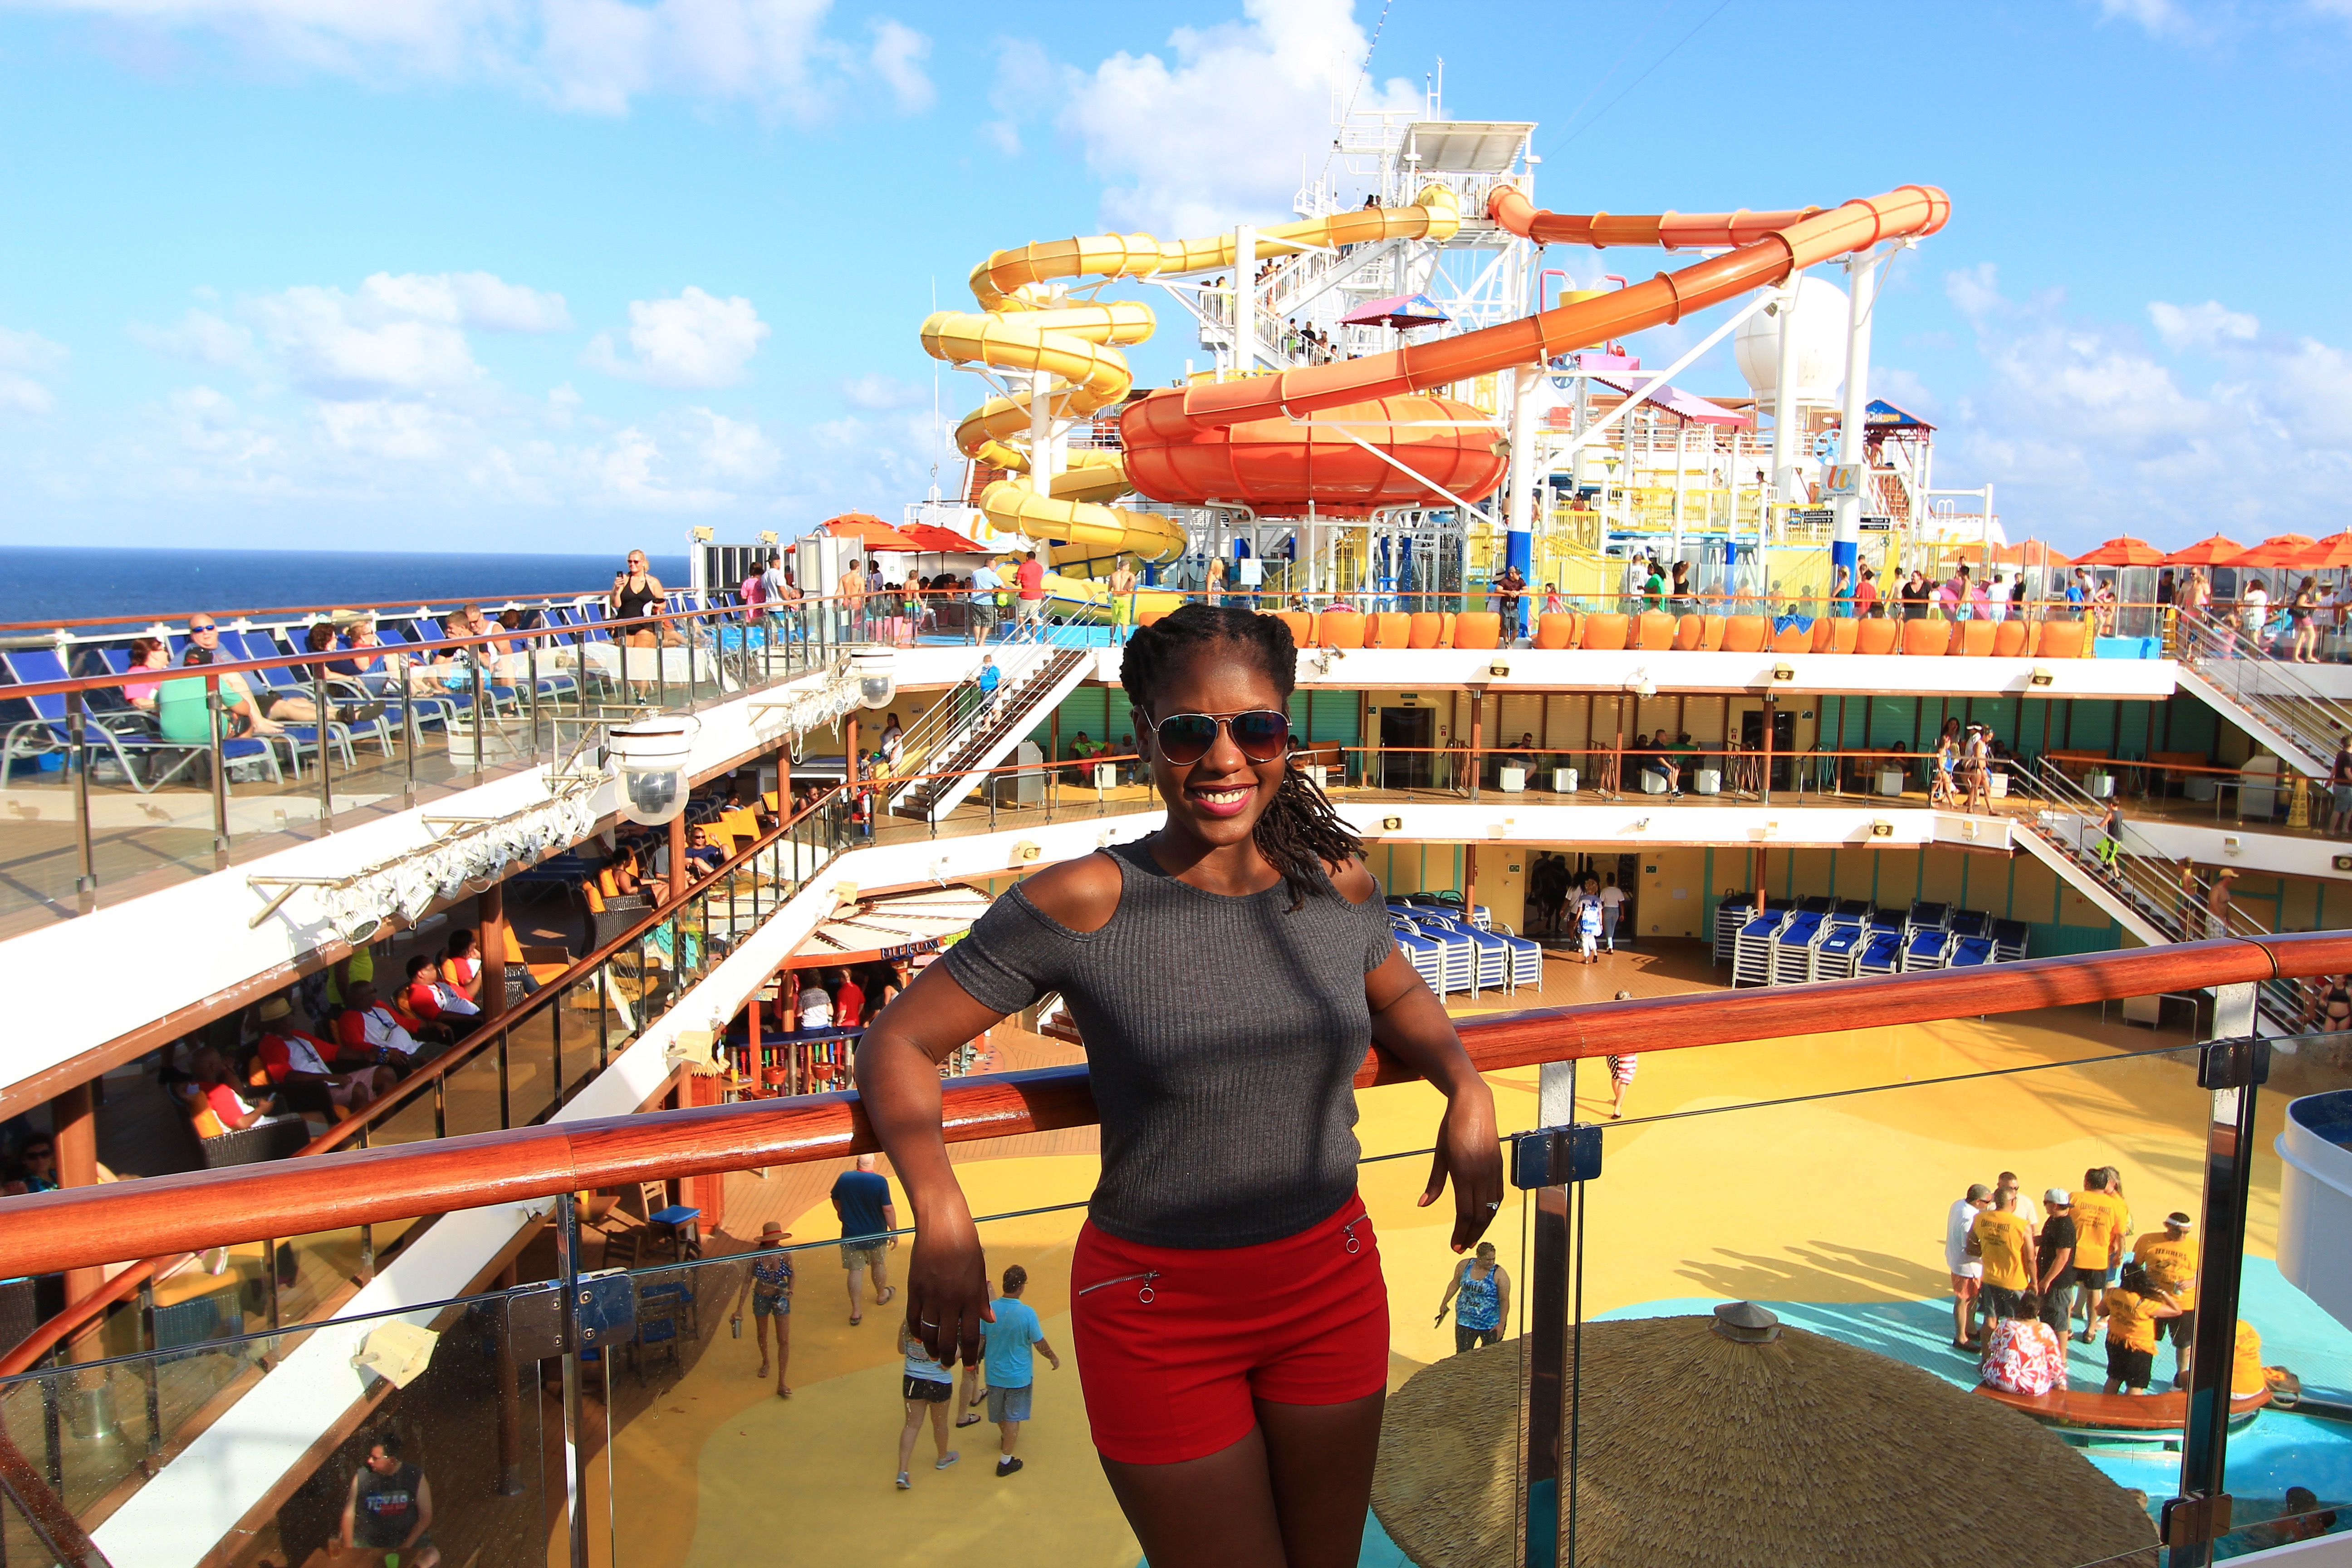 Ahoy matey! My first cruise experience with Carnival Cruise Line